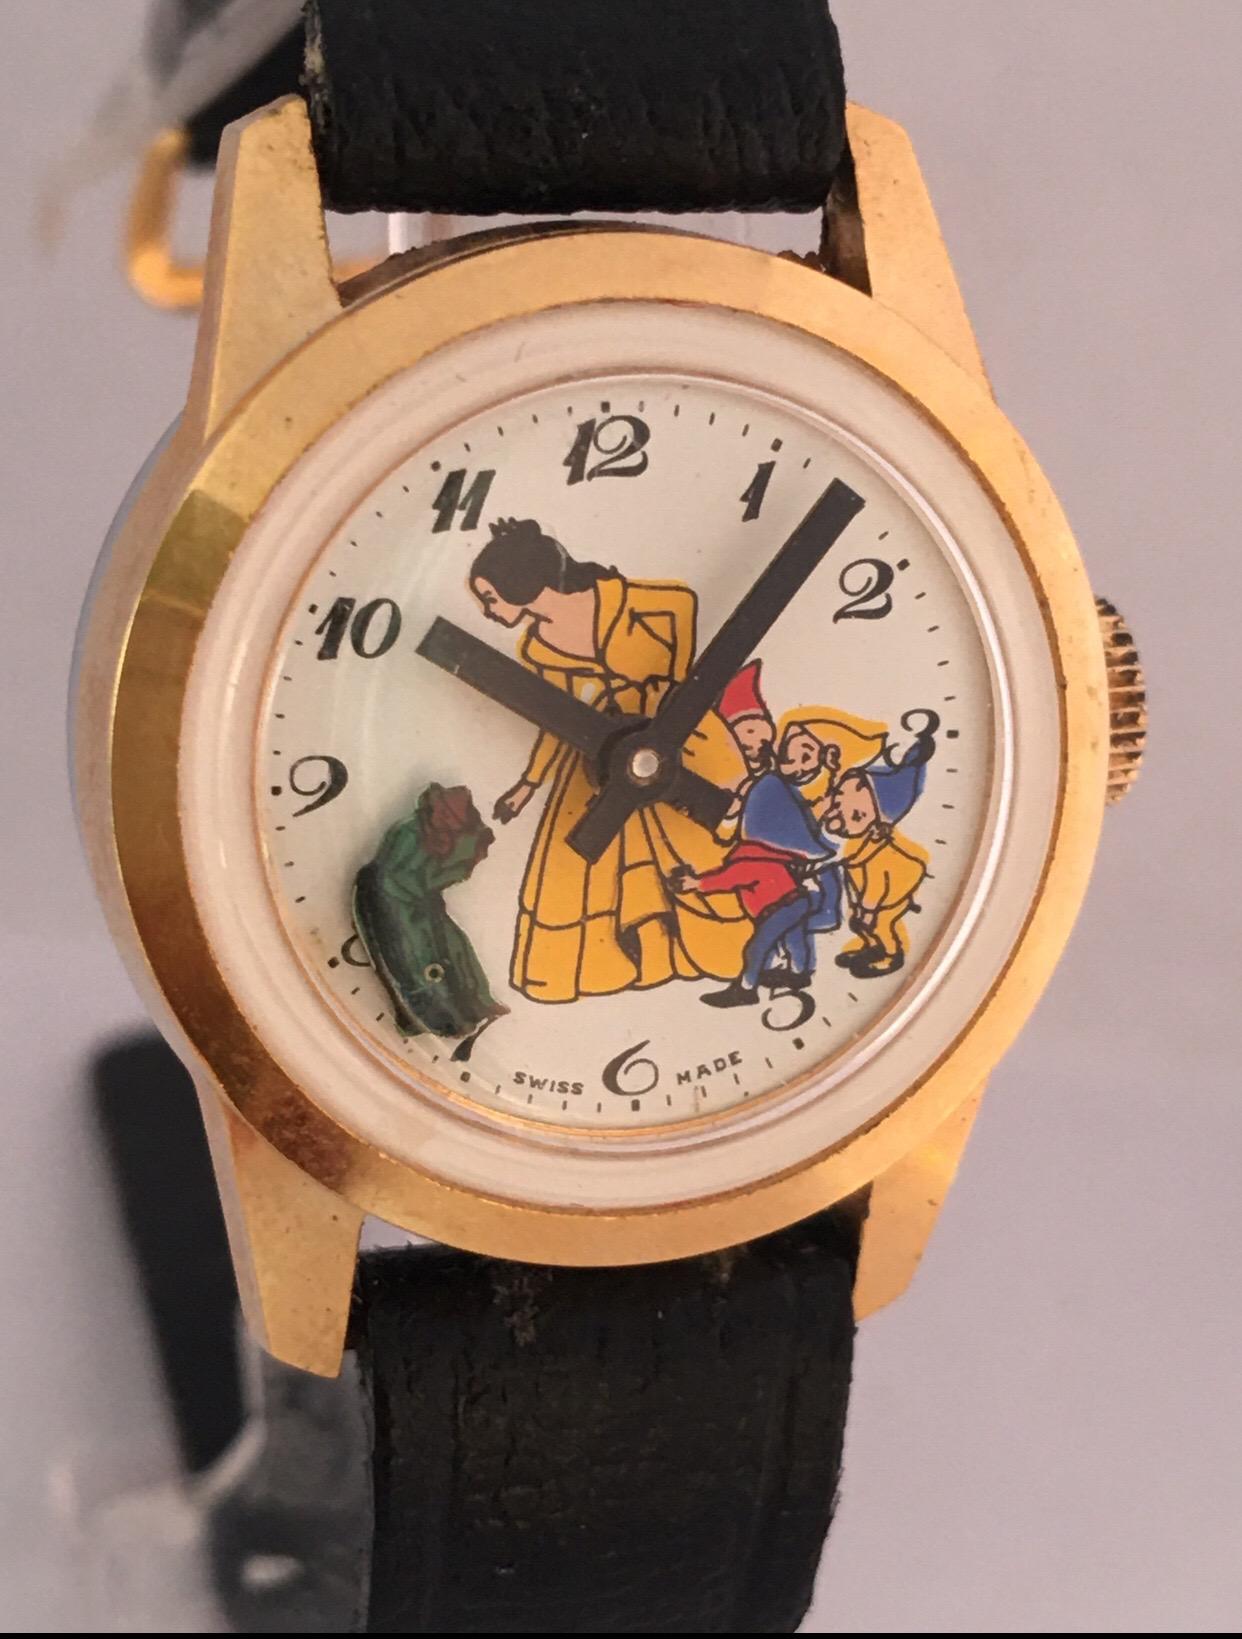 This beautiful vintage hand winding Swiss made watch is in good condition condition and it is running well. Visible signs of ageing and wear with tiny light on the watch case. It comes with a presentation box.
Please study the images carefully as